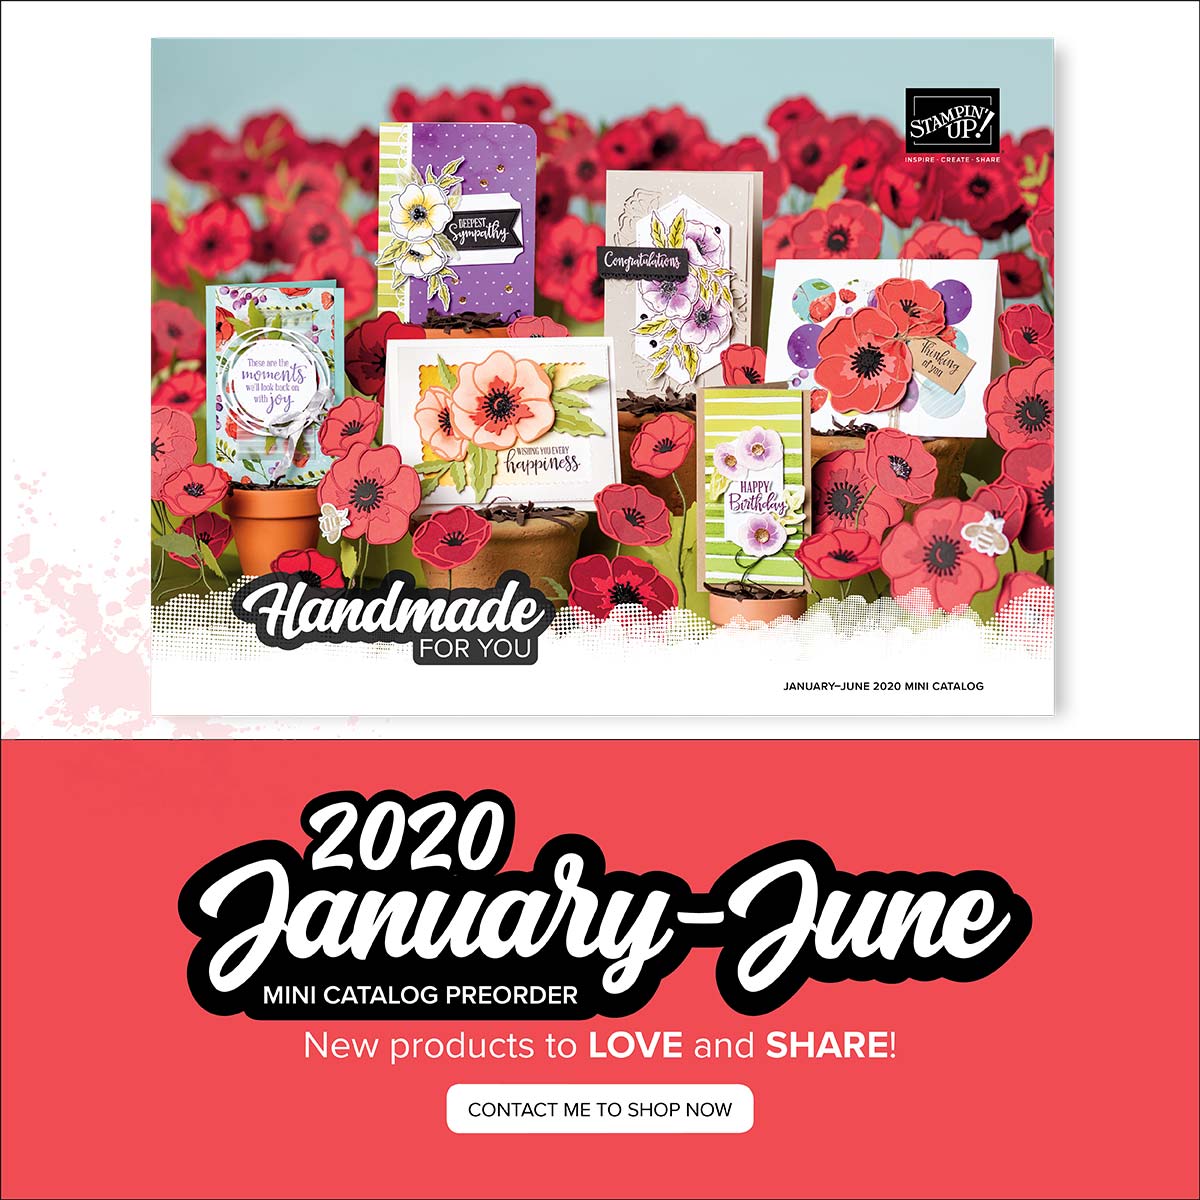 The Stampin' Up! New Mini catalog will begin on January 3, 2020. See my blog here for details: